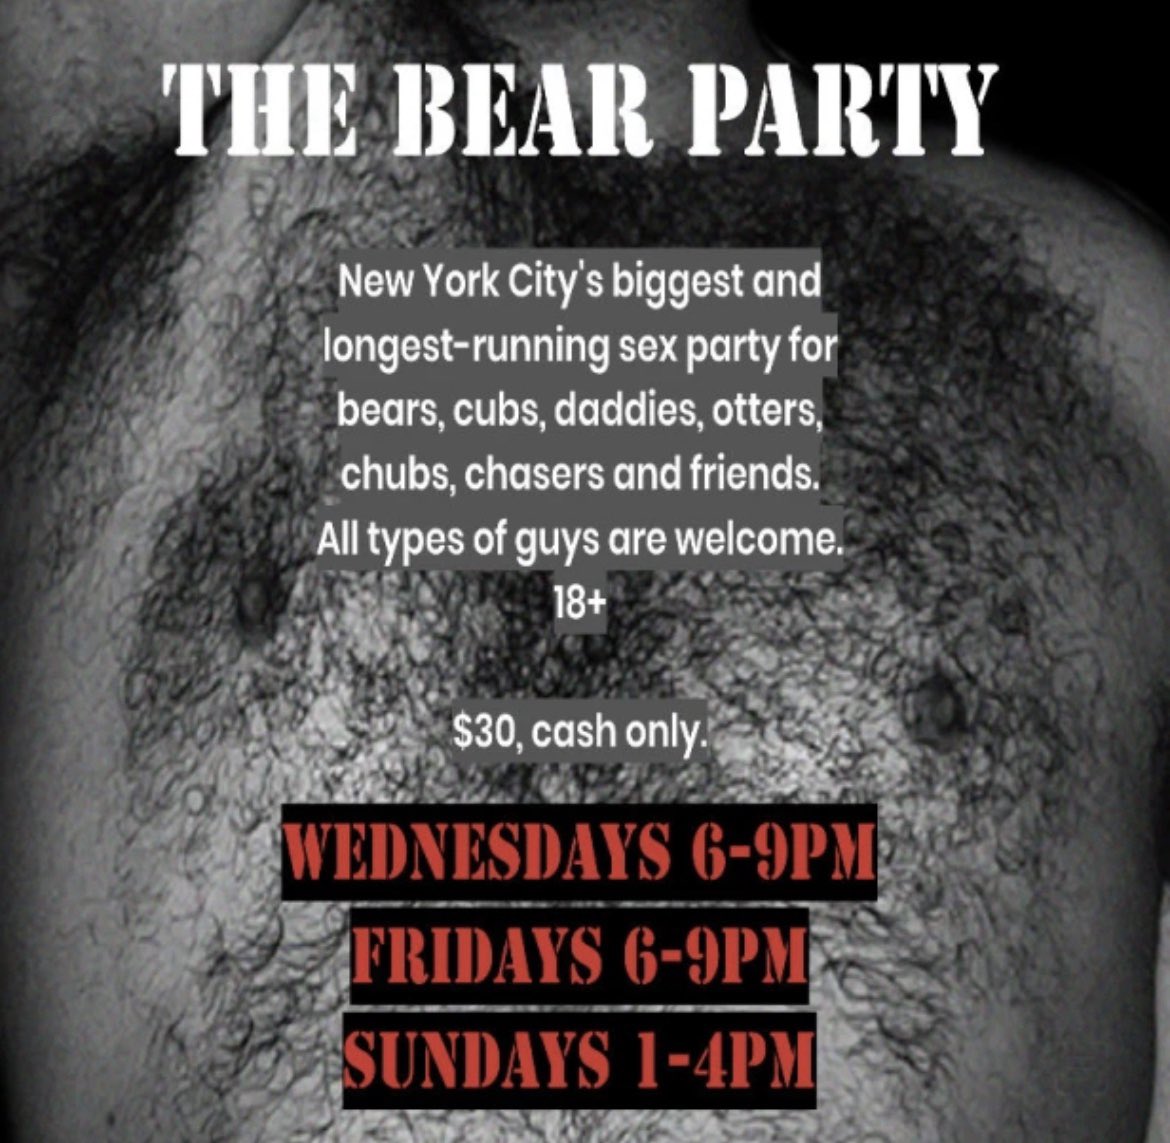 🔥The Best Bear Party in New York City is Wednesday🔥 WEDNESDAY – NYC Gay Play Party | BEAR PARTY, a great NYC Gay Sex Party on W37th St, Midtown, for bears, cubs & admirers. $30 cash. 6PM-9PM | Hosted by @BearPartyNYC ⬇️For info visit link below ⬇️ gaysexnyc.wordpress.com/2024/04/16/eve…